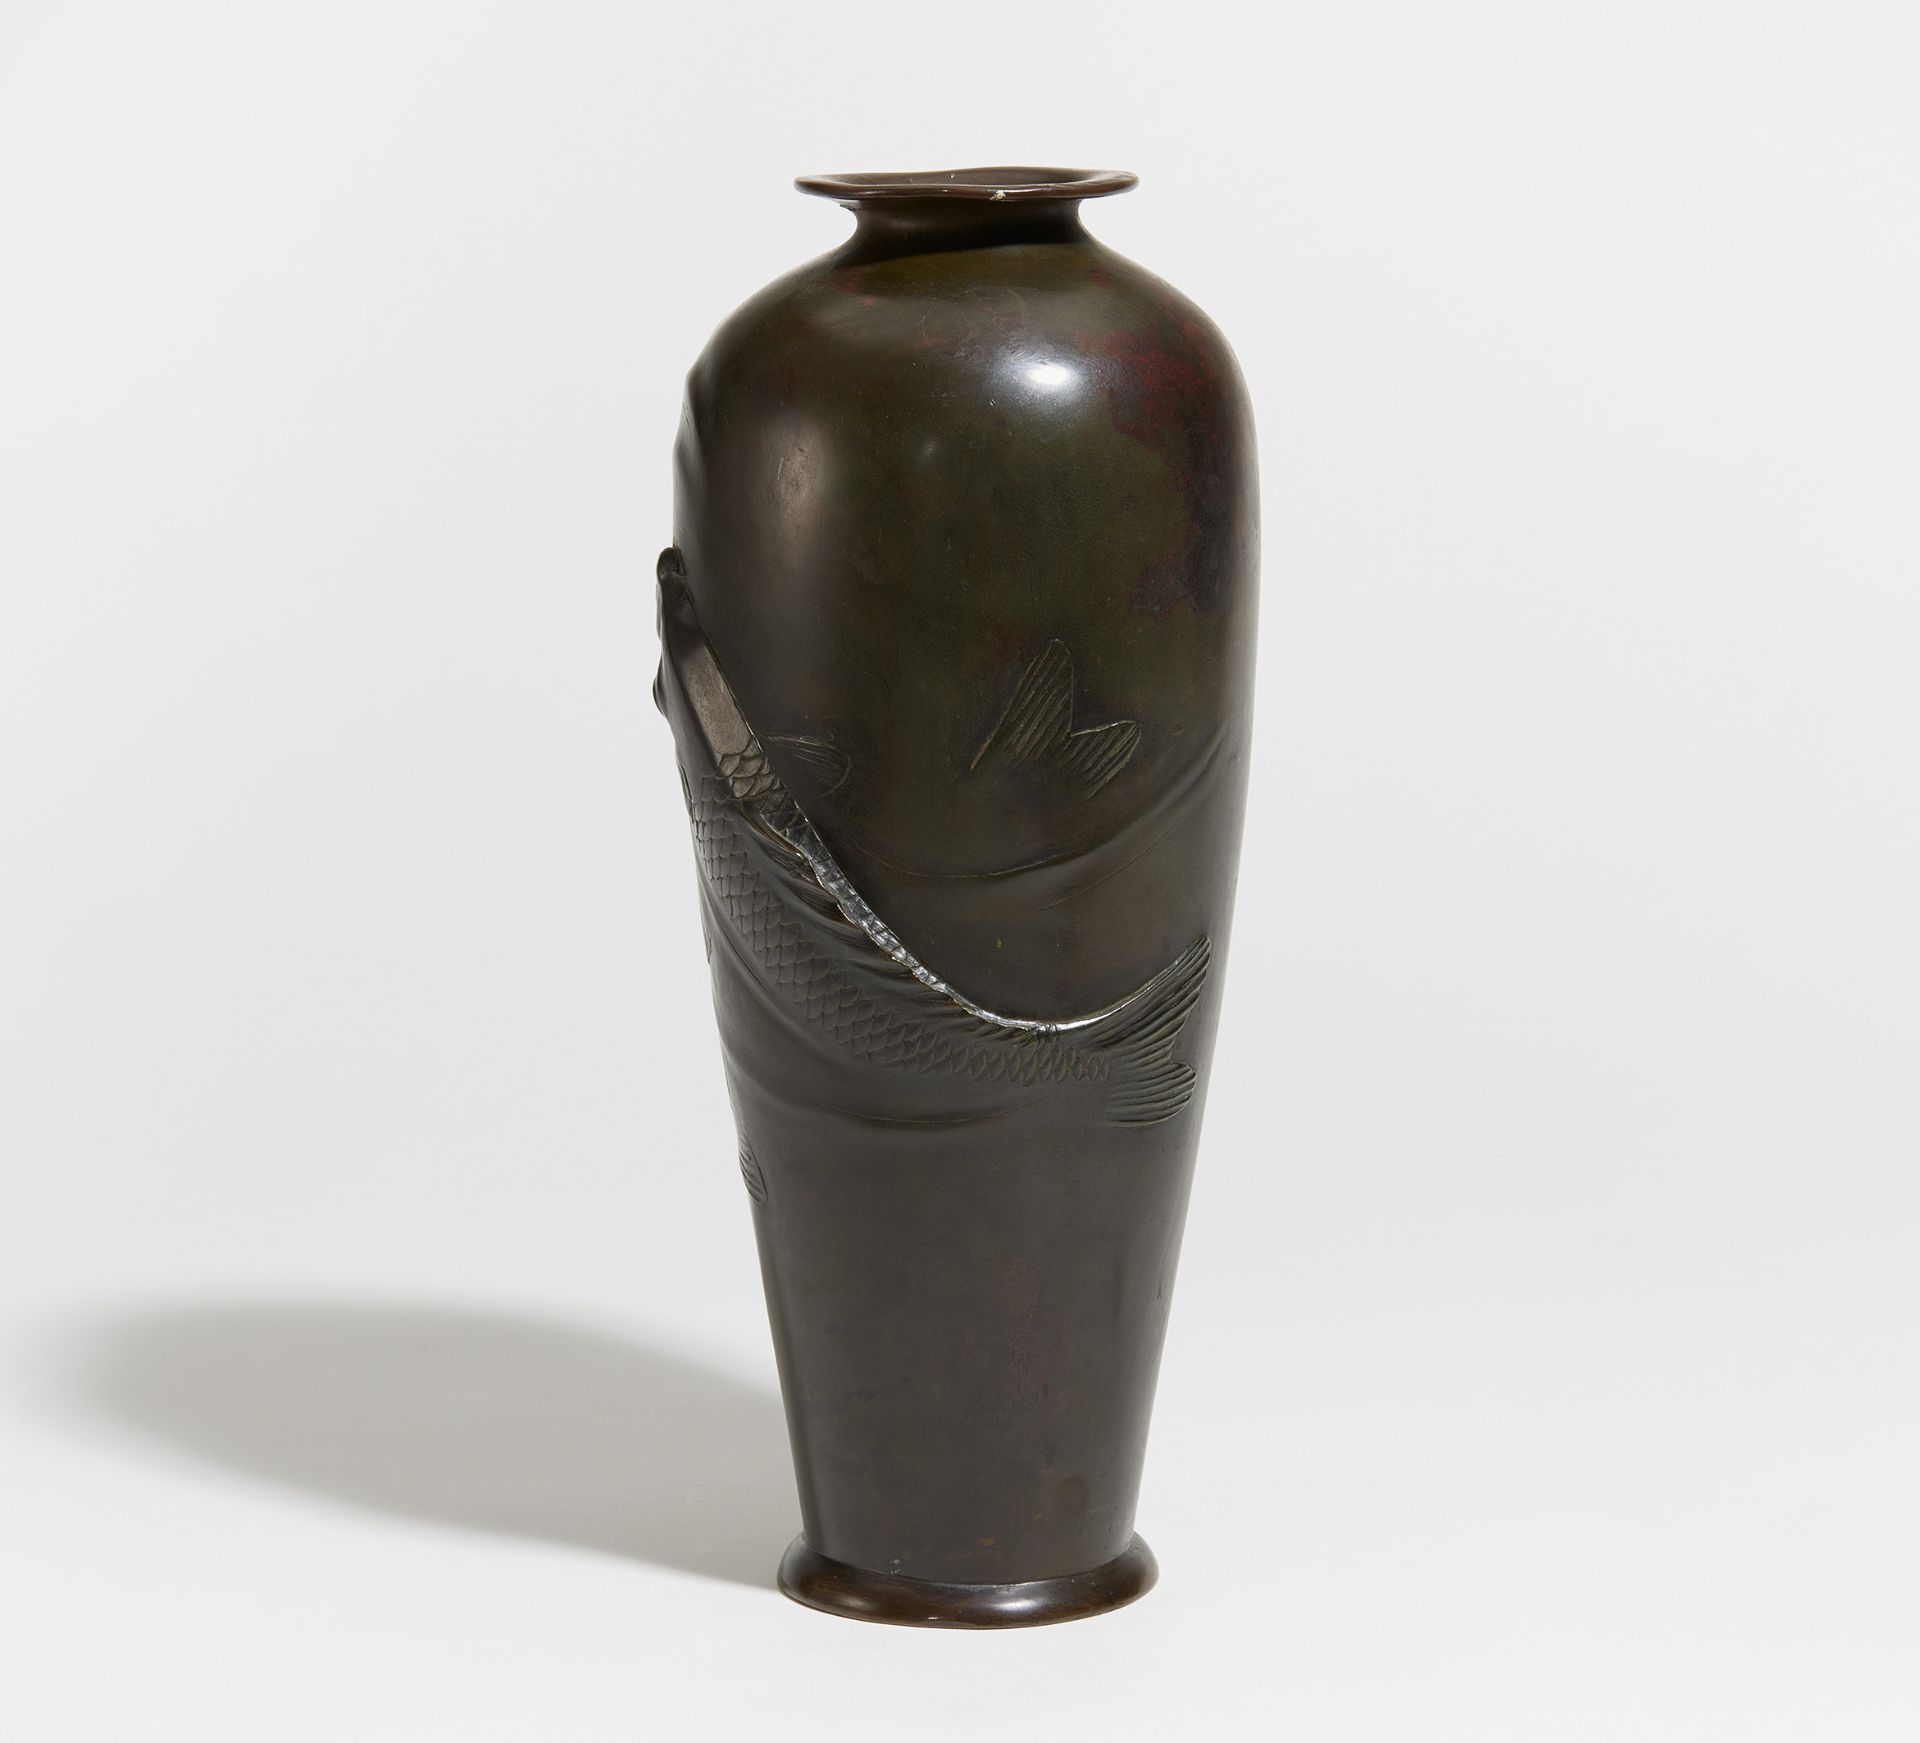 VASE WITH TWO LARGE CARPS. Japan. Meiji period (1868-1912). Bronze with dark patina. Relief. Eyes - Image 2 of 4